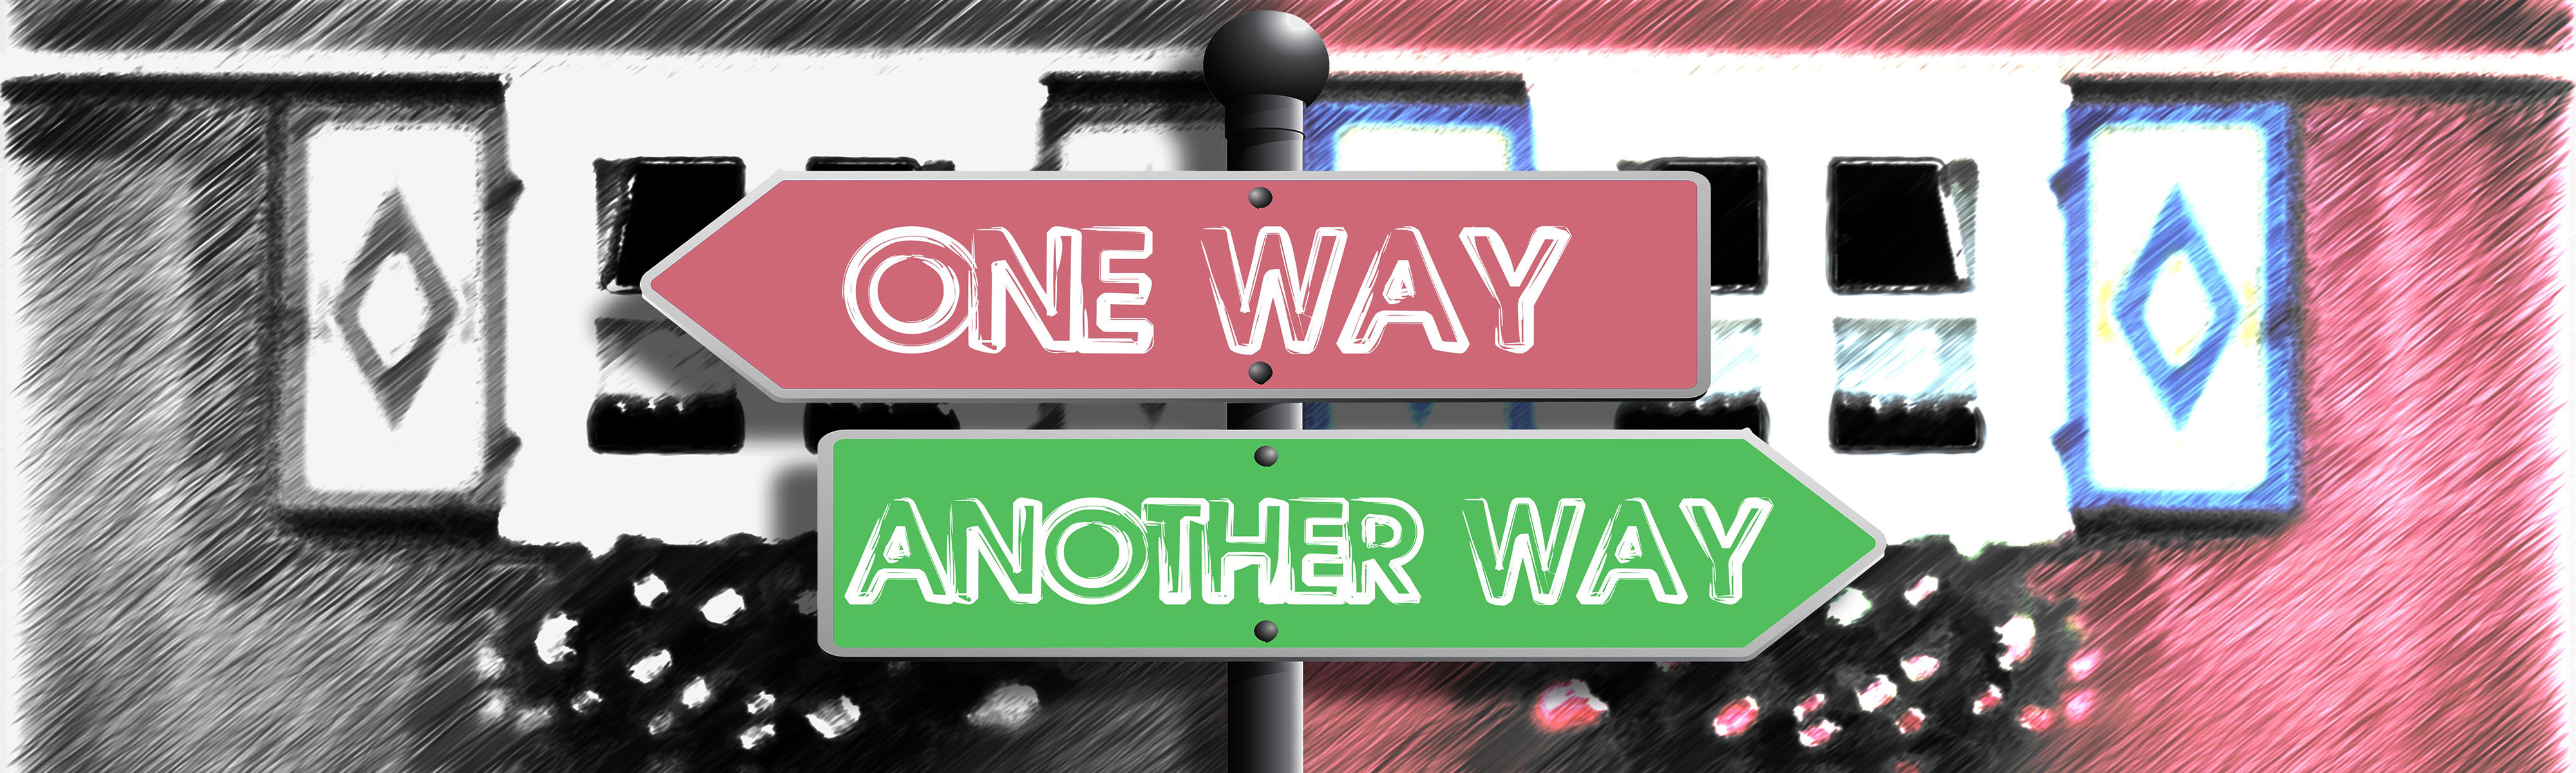 MachMit - One Way - Another Way